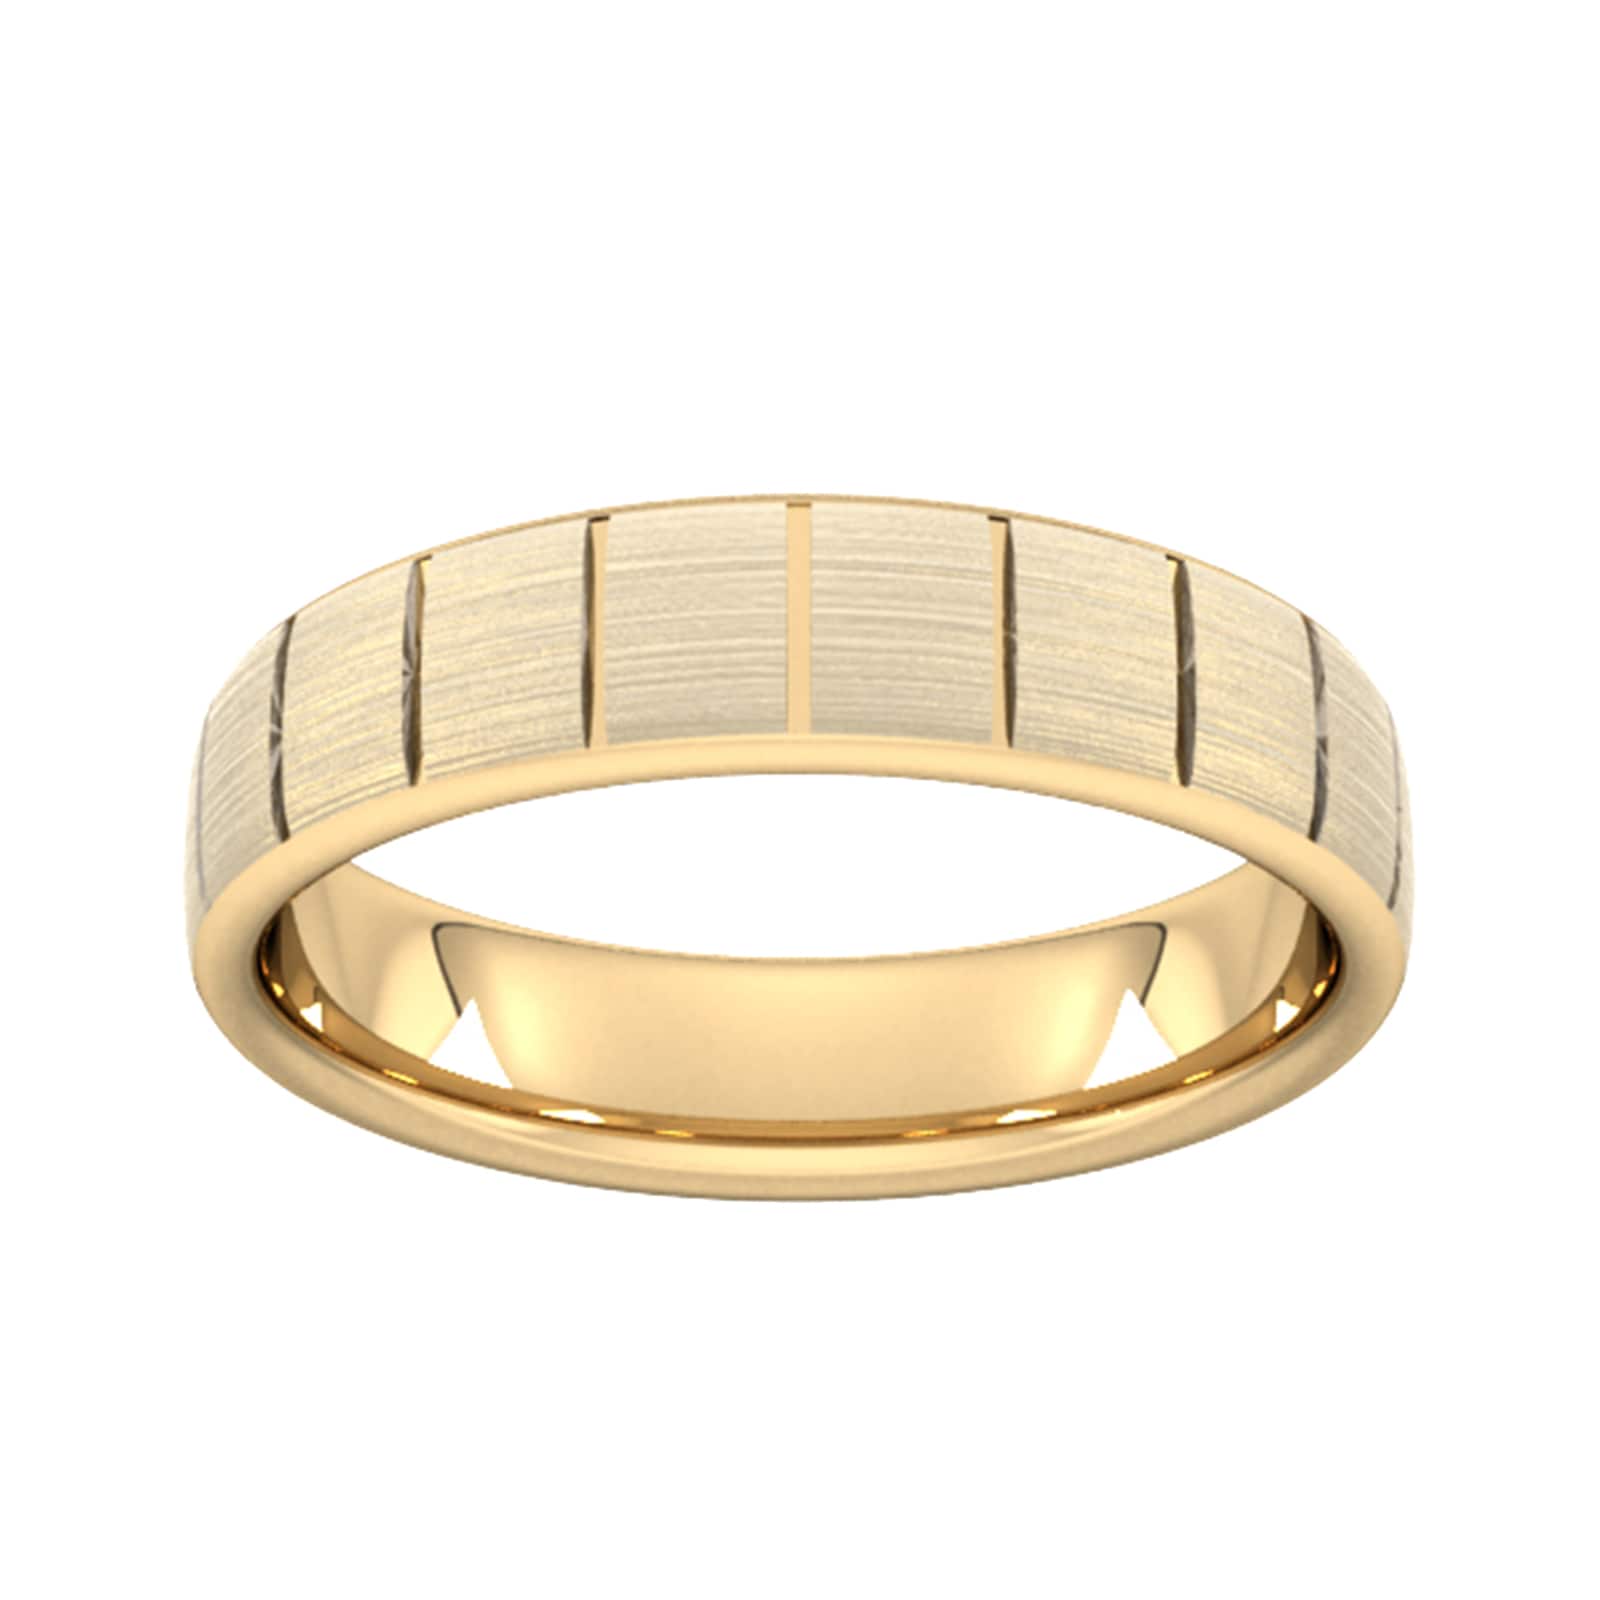 5mm Slight Court Standard Vertical Lines Wedding Ring In 9 Carat Yellow Gold - Ring Size P